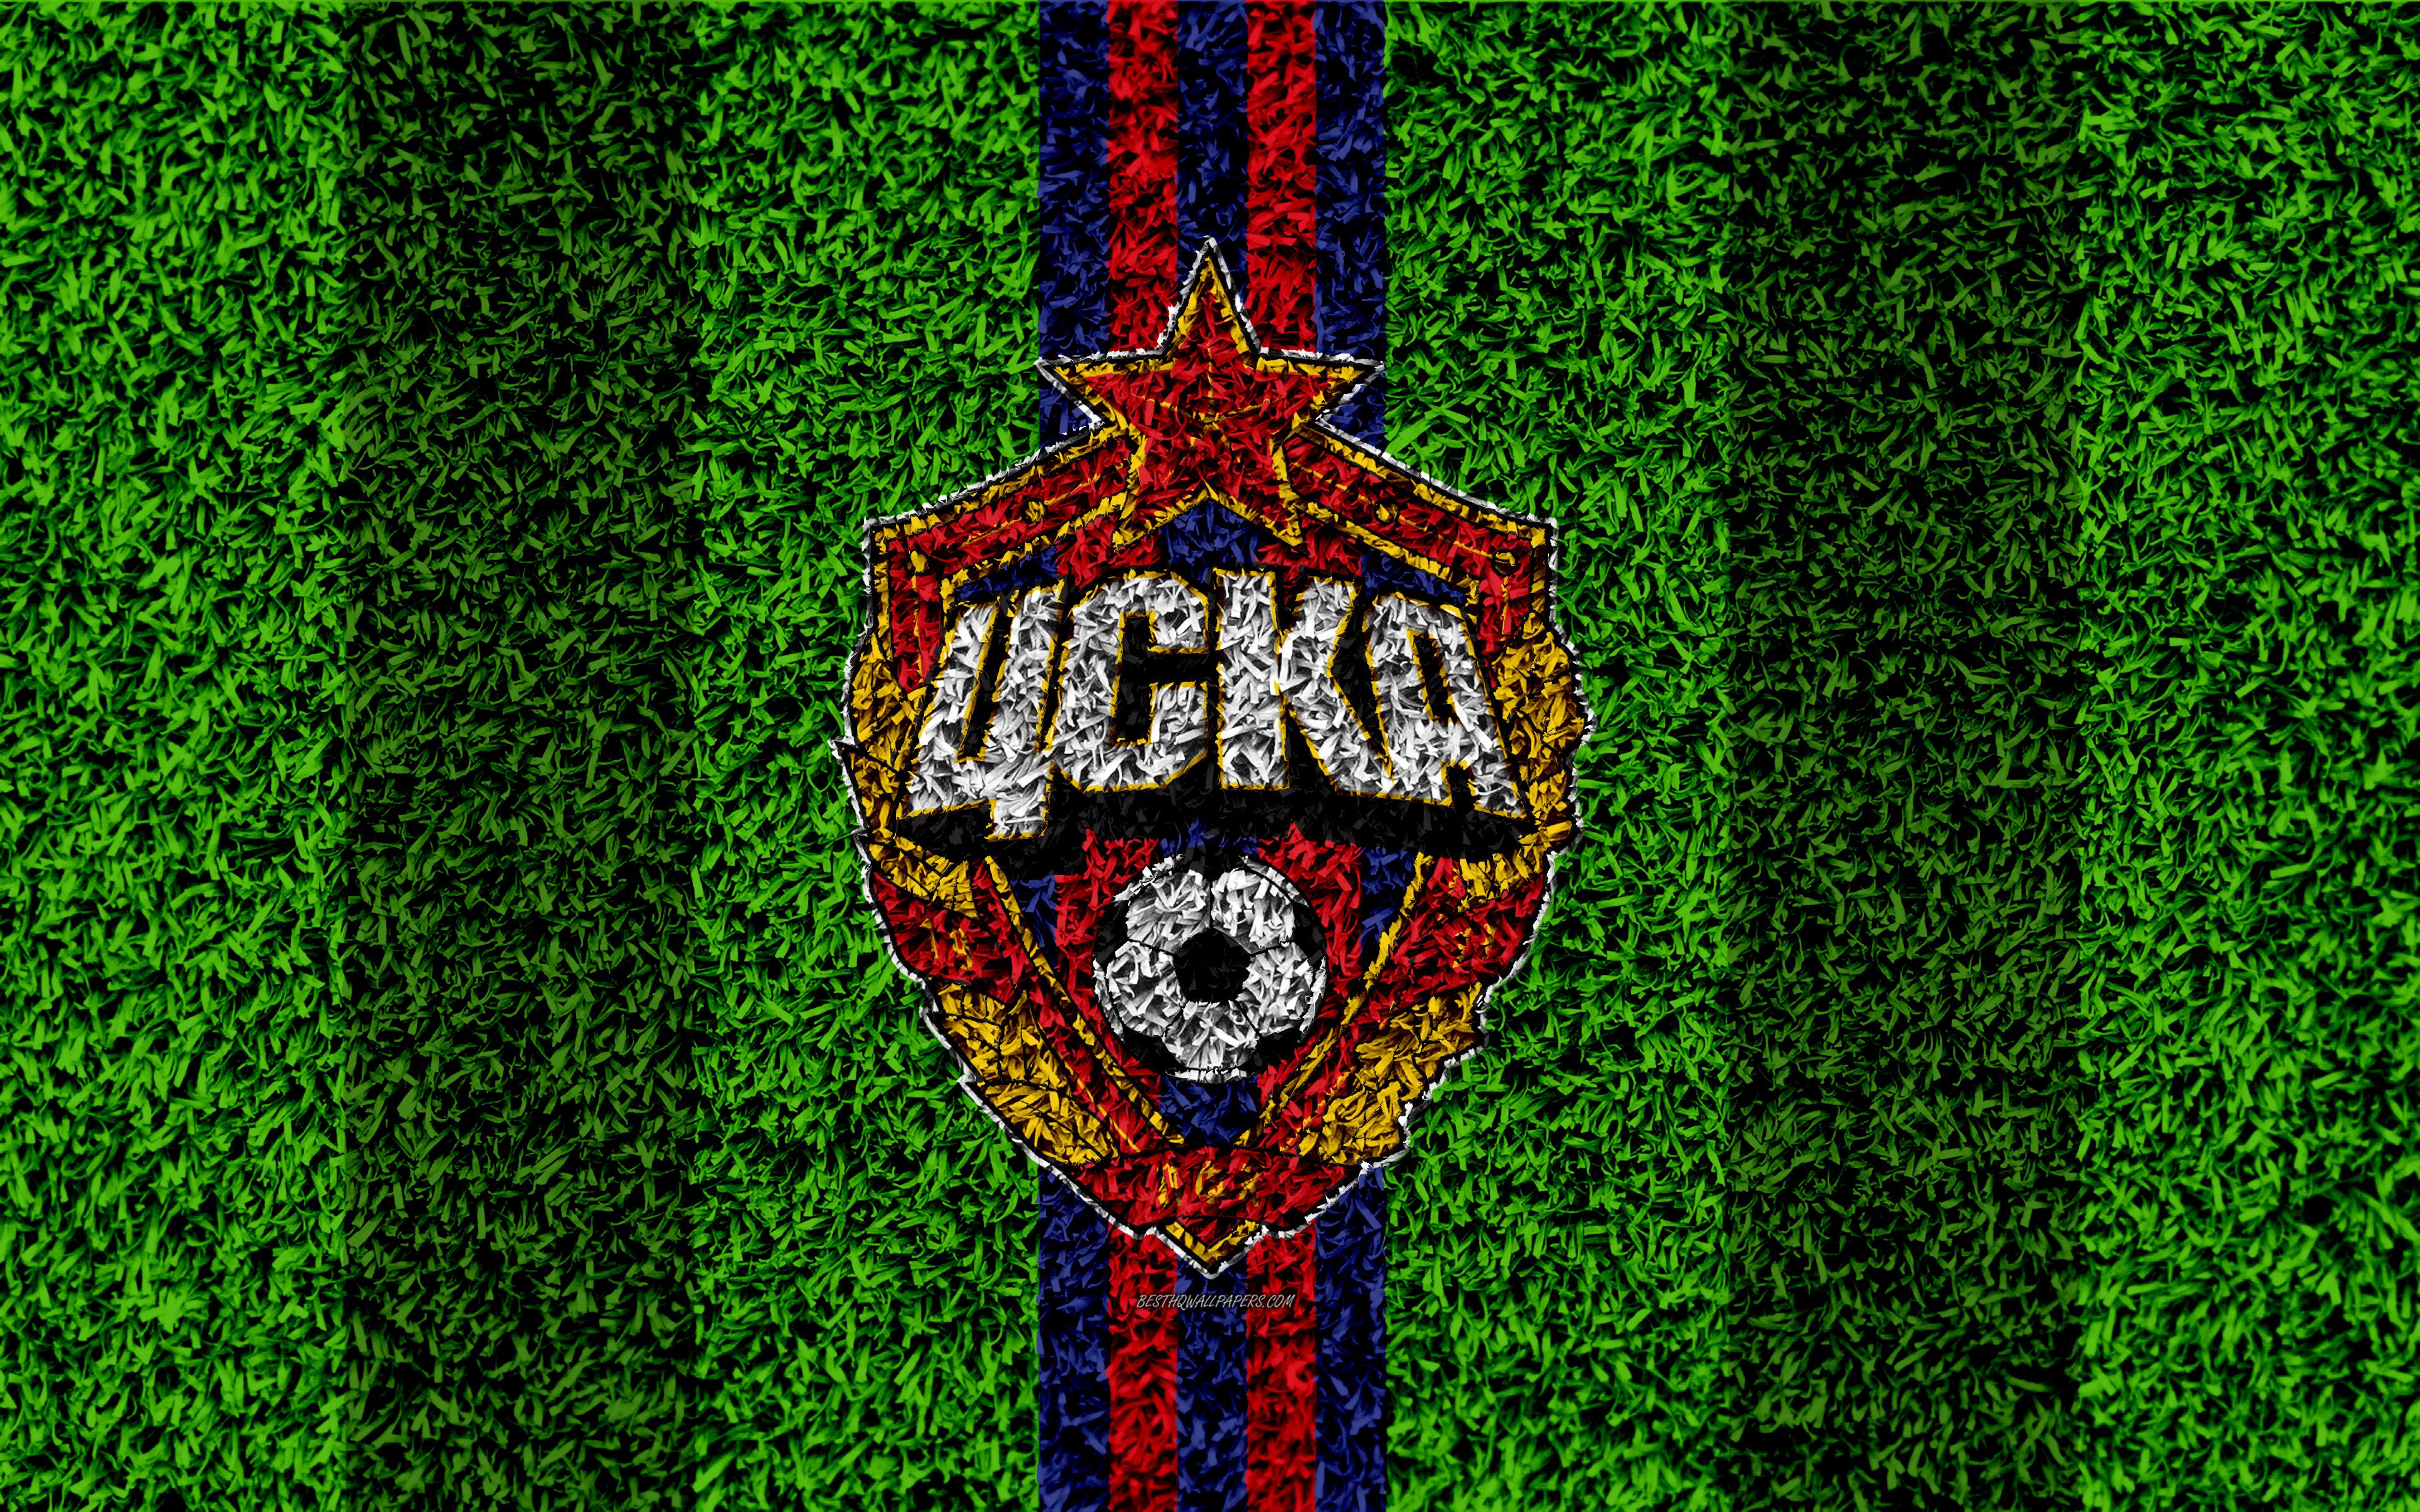 Download wallpaper PFC CSKA Moscow, 4k, logo, grass texture, Russian football club, blue red lines, football lawn, Russian Premier League, Moscow, Russia, football for desktop with resolution 3840x2400. High Quality HD picture